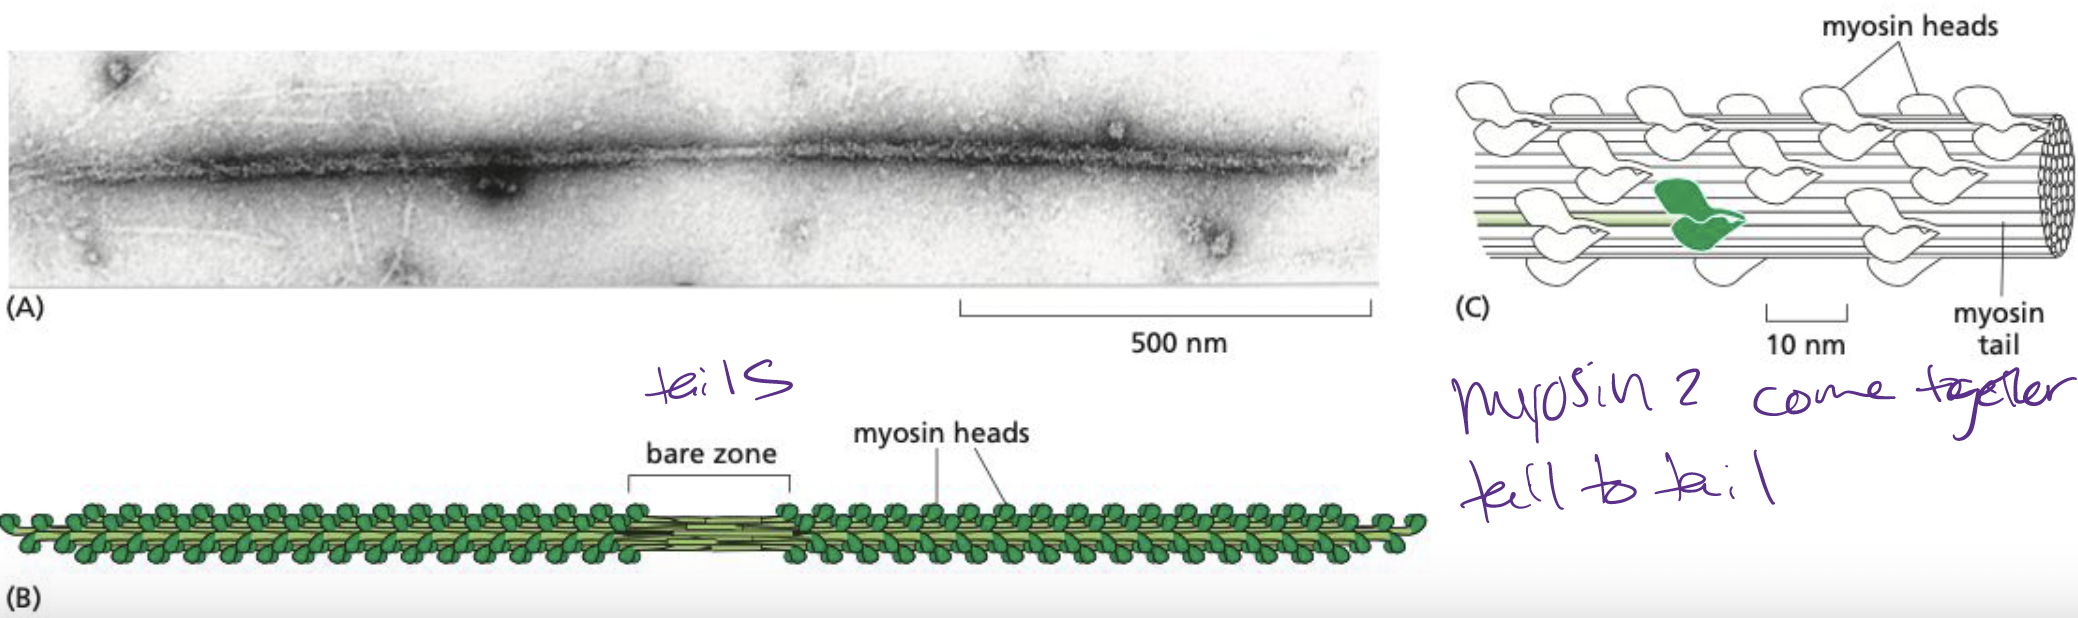 <p>Tail-tail interactions form large, bipolar thick filaments that have several hundred myosin heads, oriented in opposite directions at the two ends of the thick filament.</p><ul><li><p>each myosin head binds to and hydrolyzes ATP to walk towards plus end of actin filament</p></li></ul>